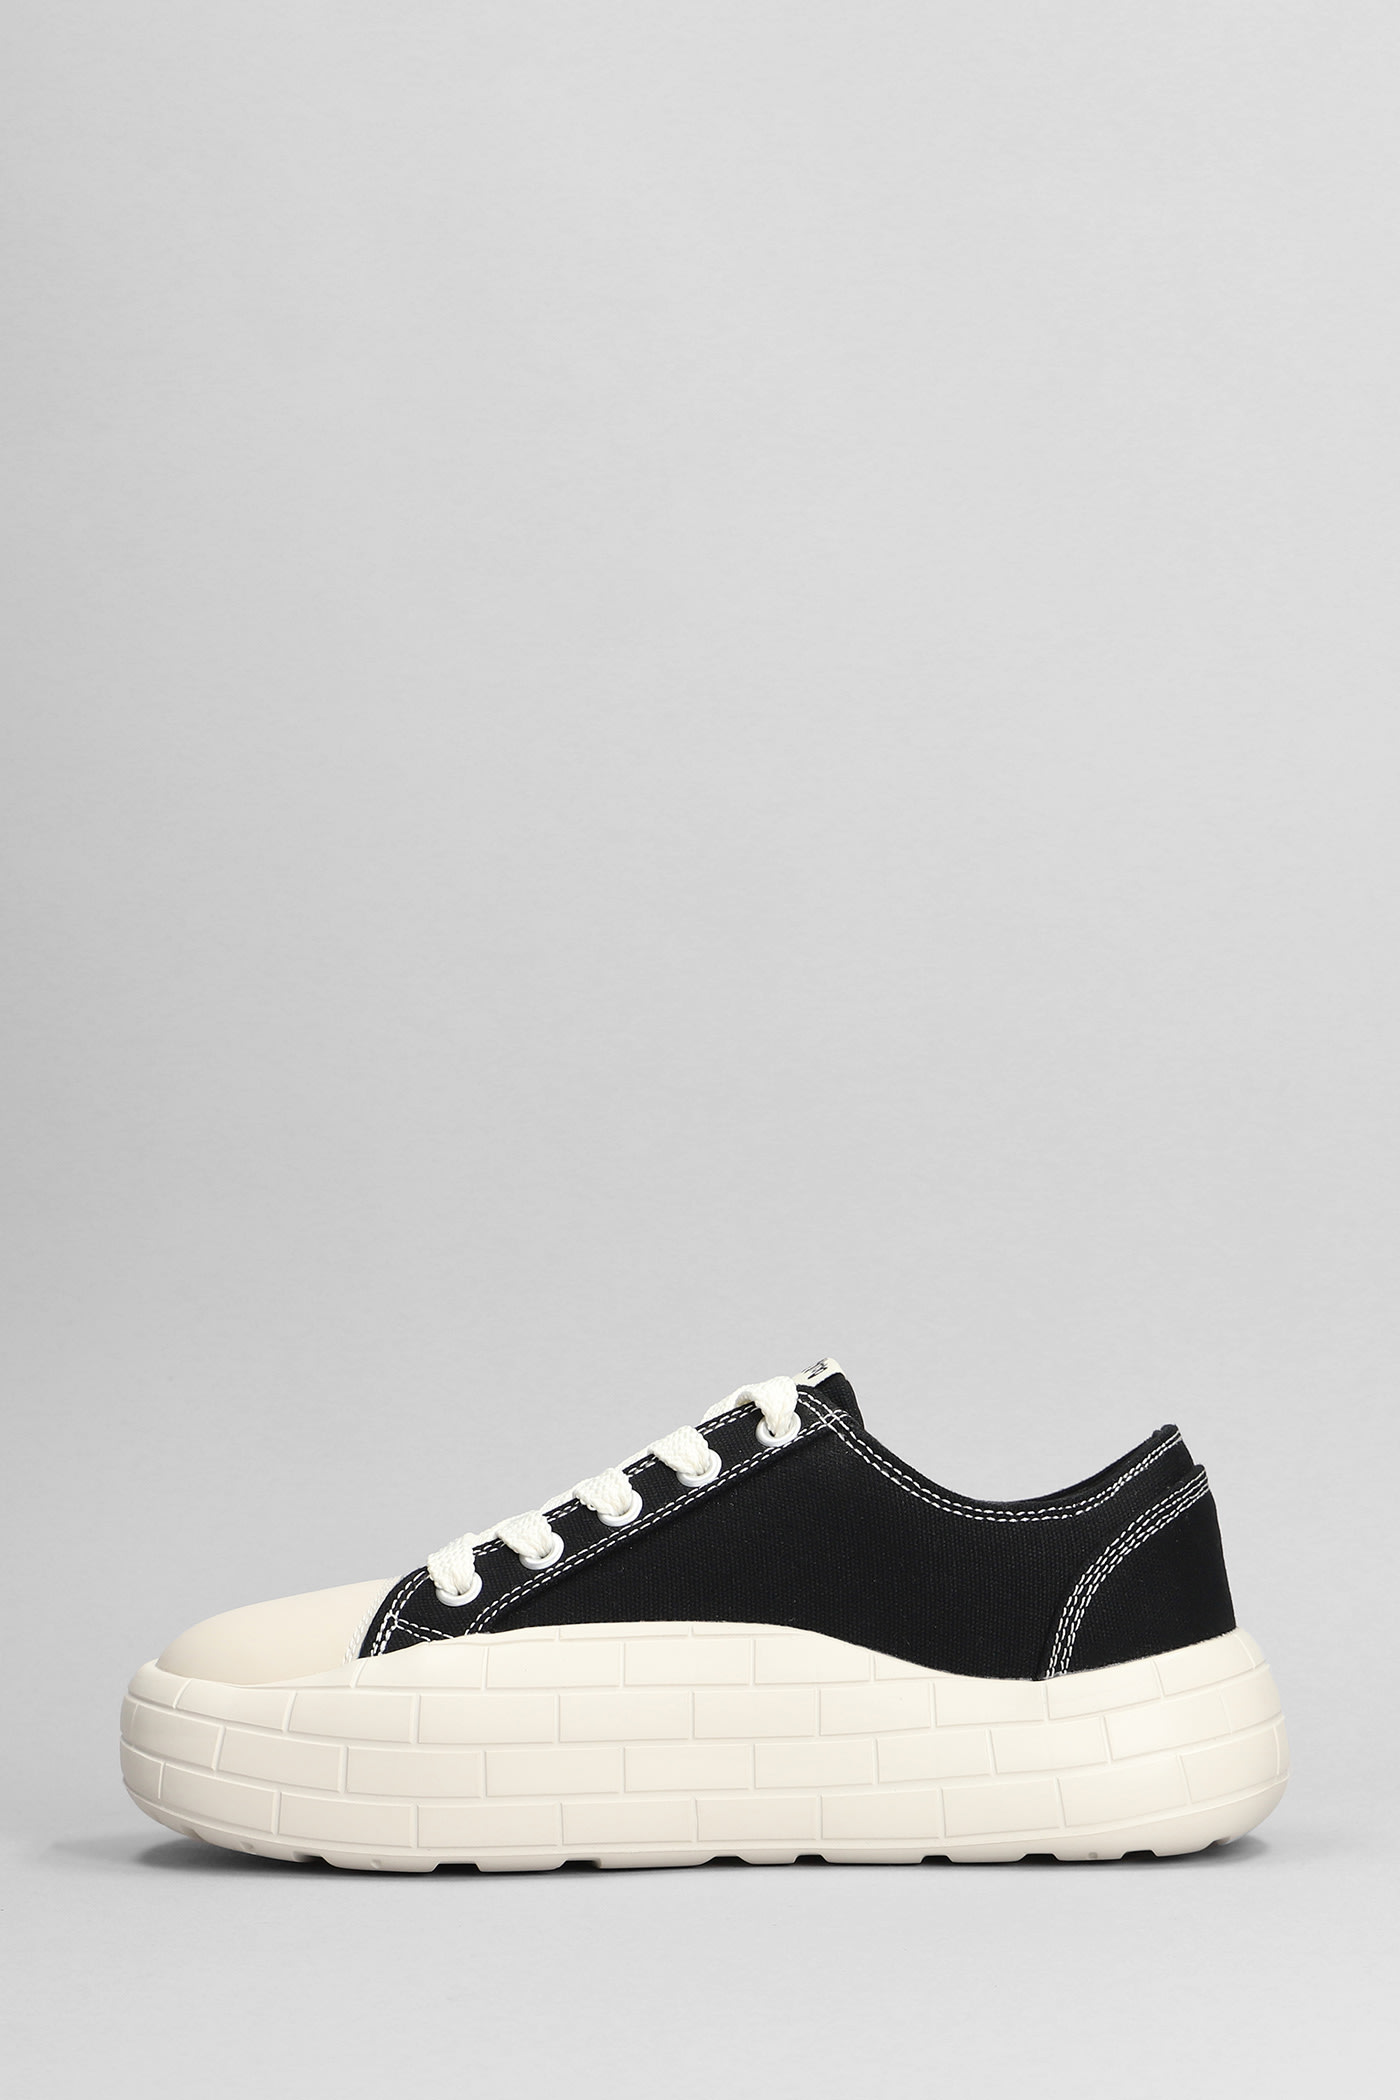 Shop Acupuncture Nyu Vulc G2 Sneakers In Black Canvas